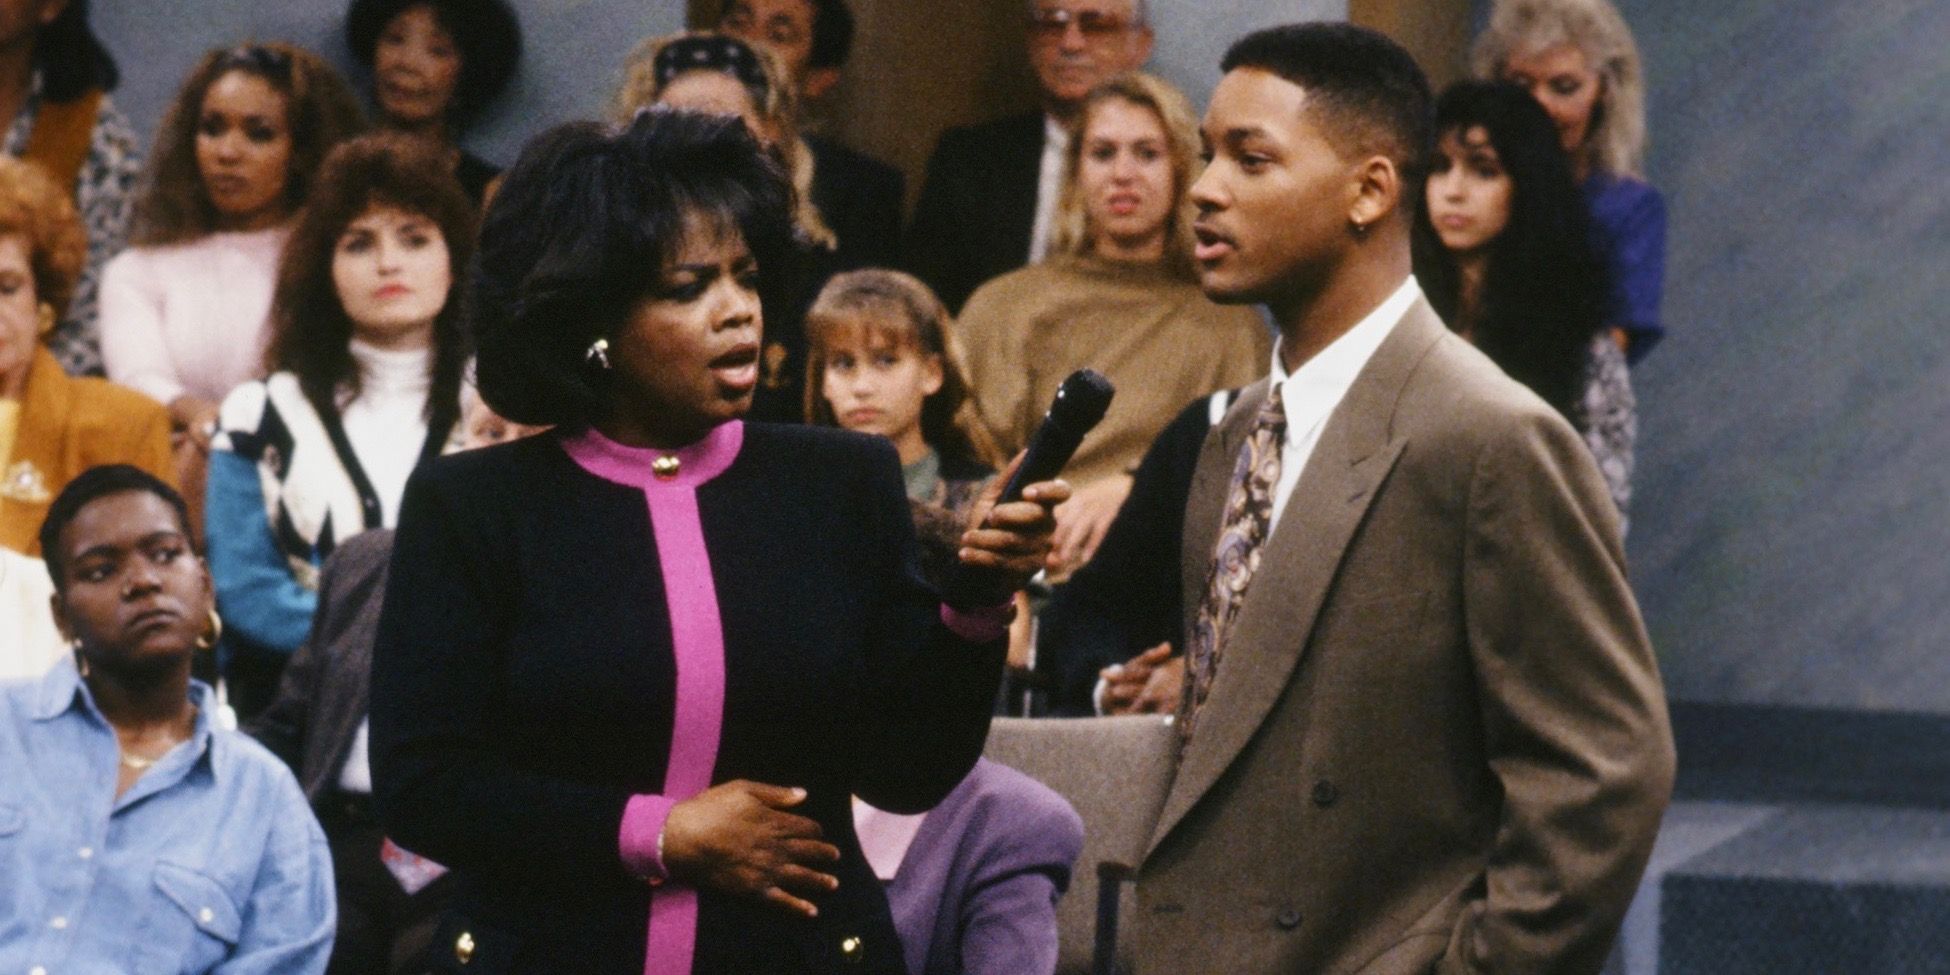 Oprah and Will Smith in The Fresh Prince of Bel Air